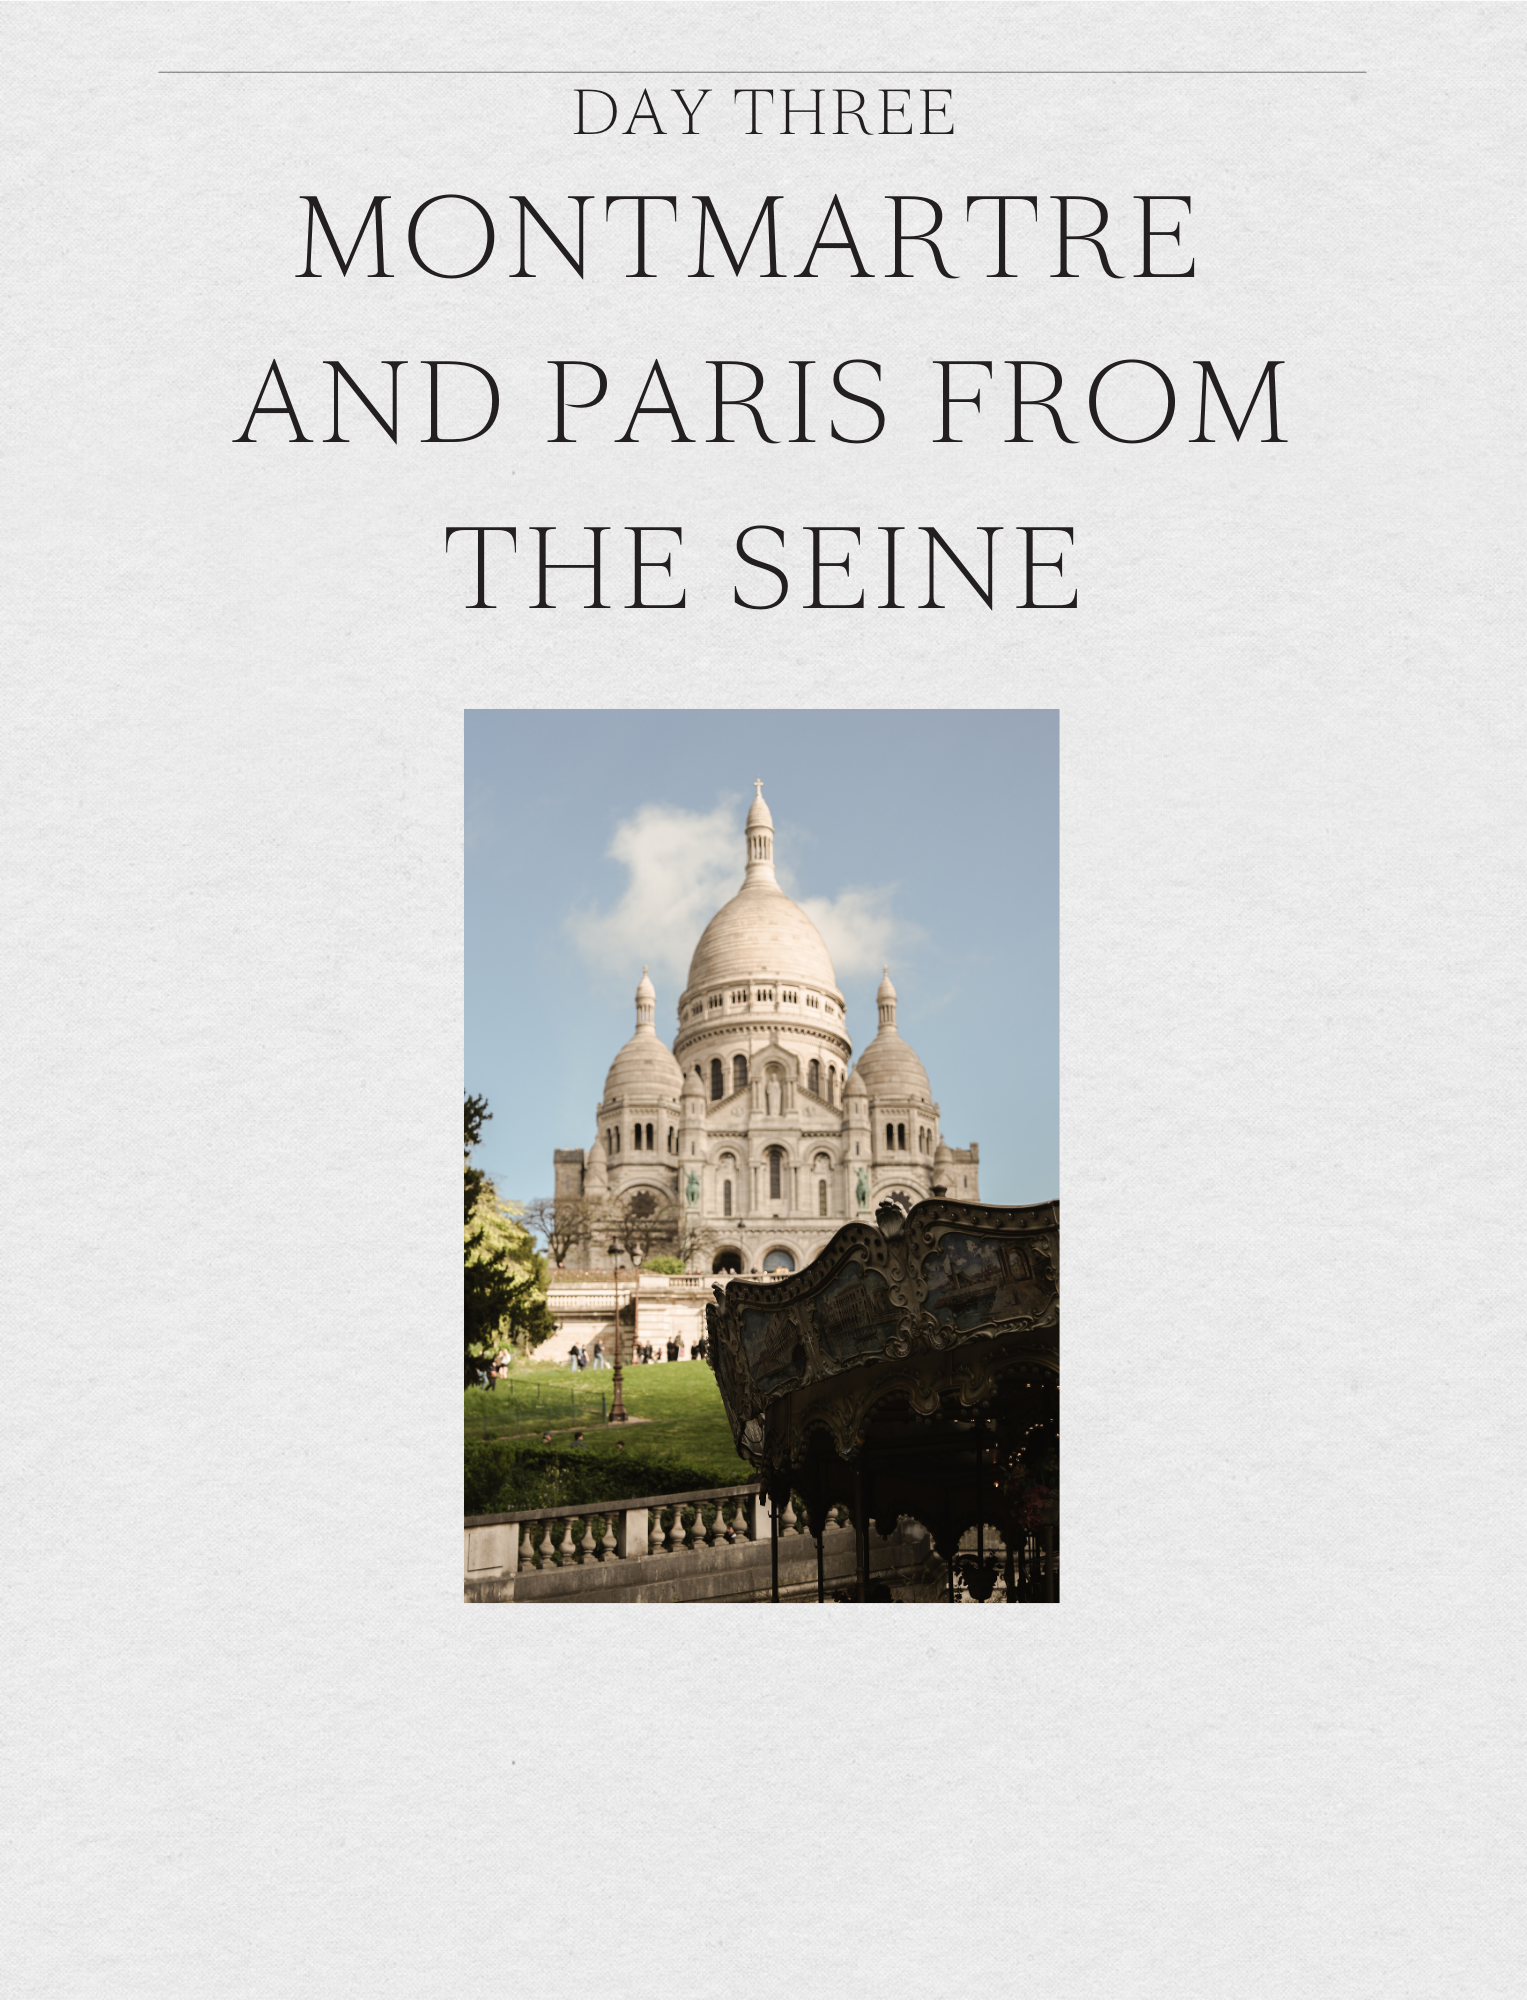 A Guide to Paris - Day Three cover page, by Simply Slow Traveler